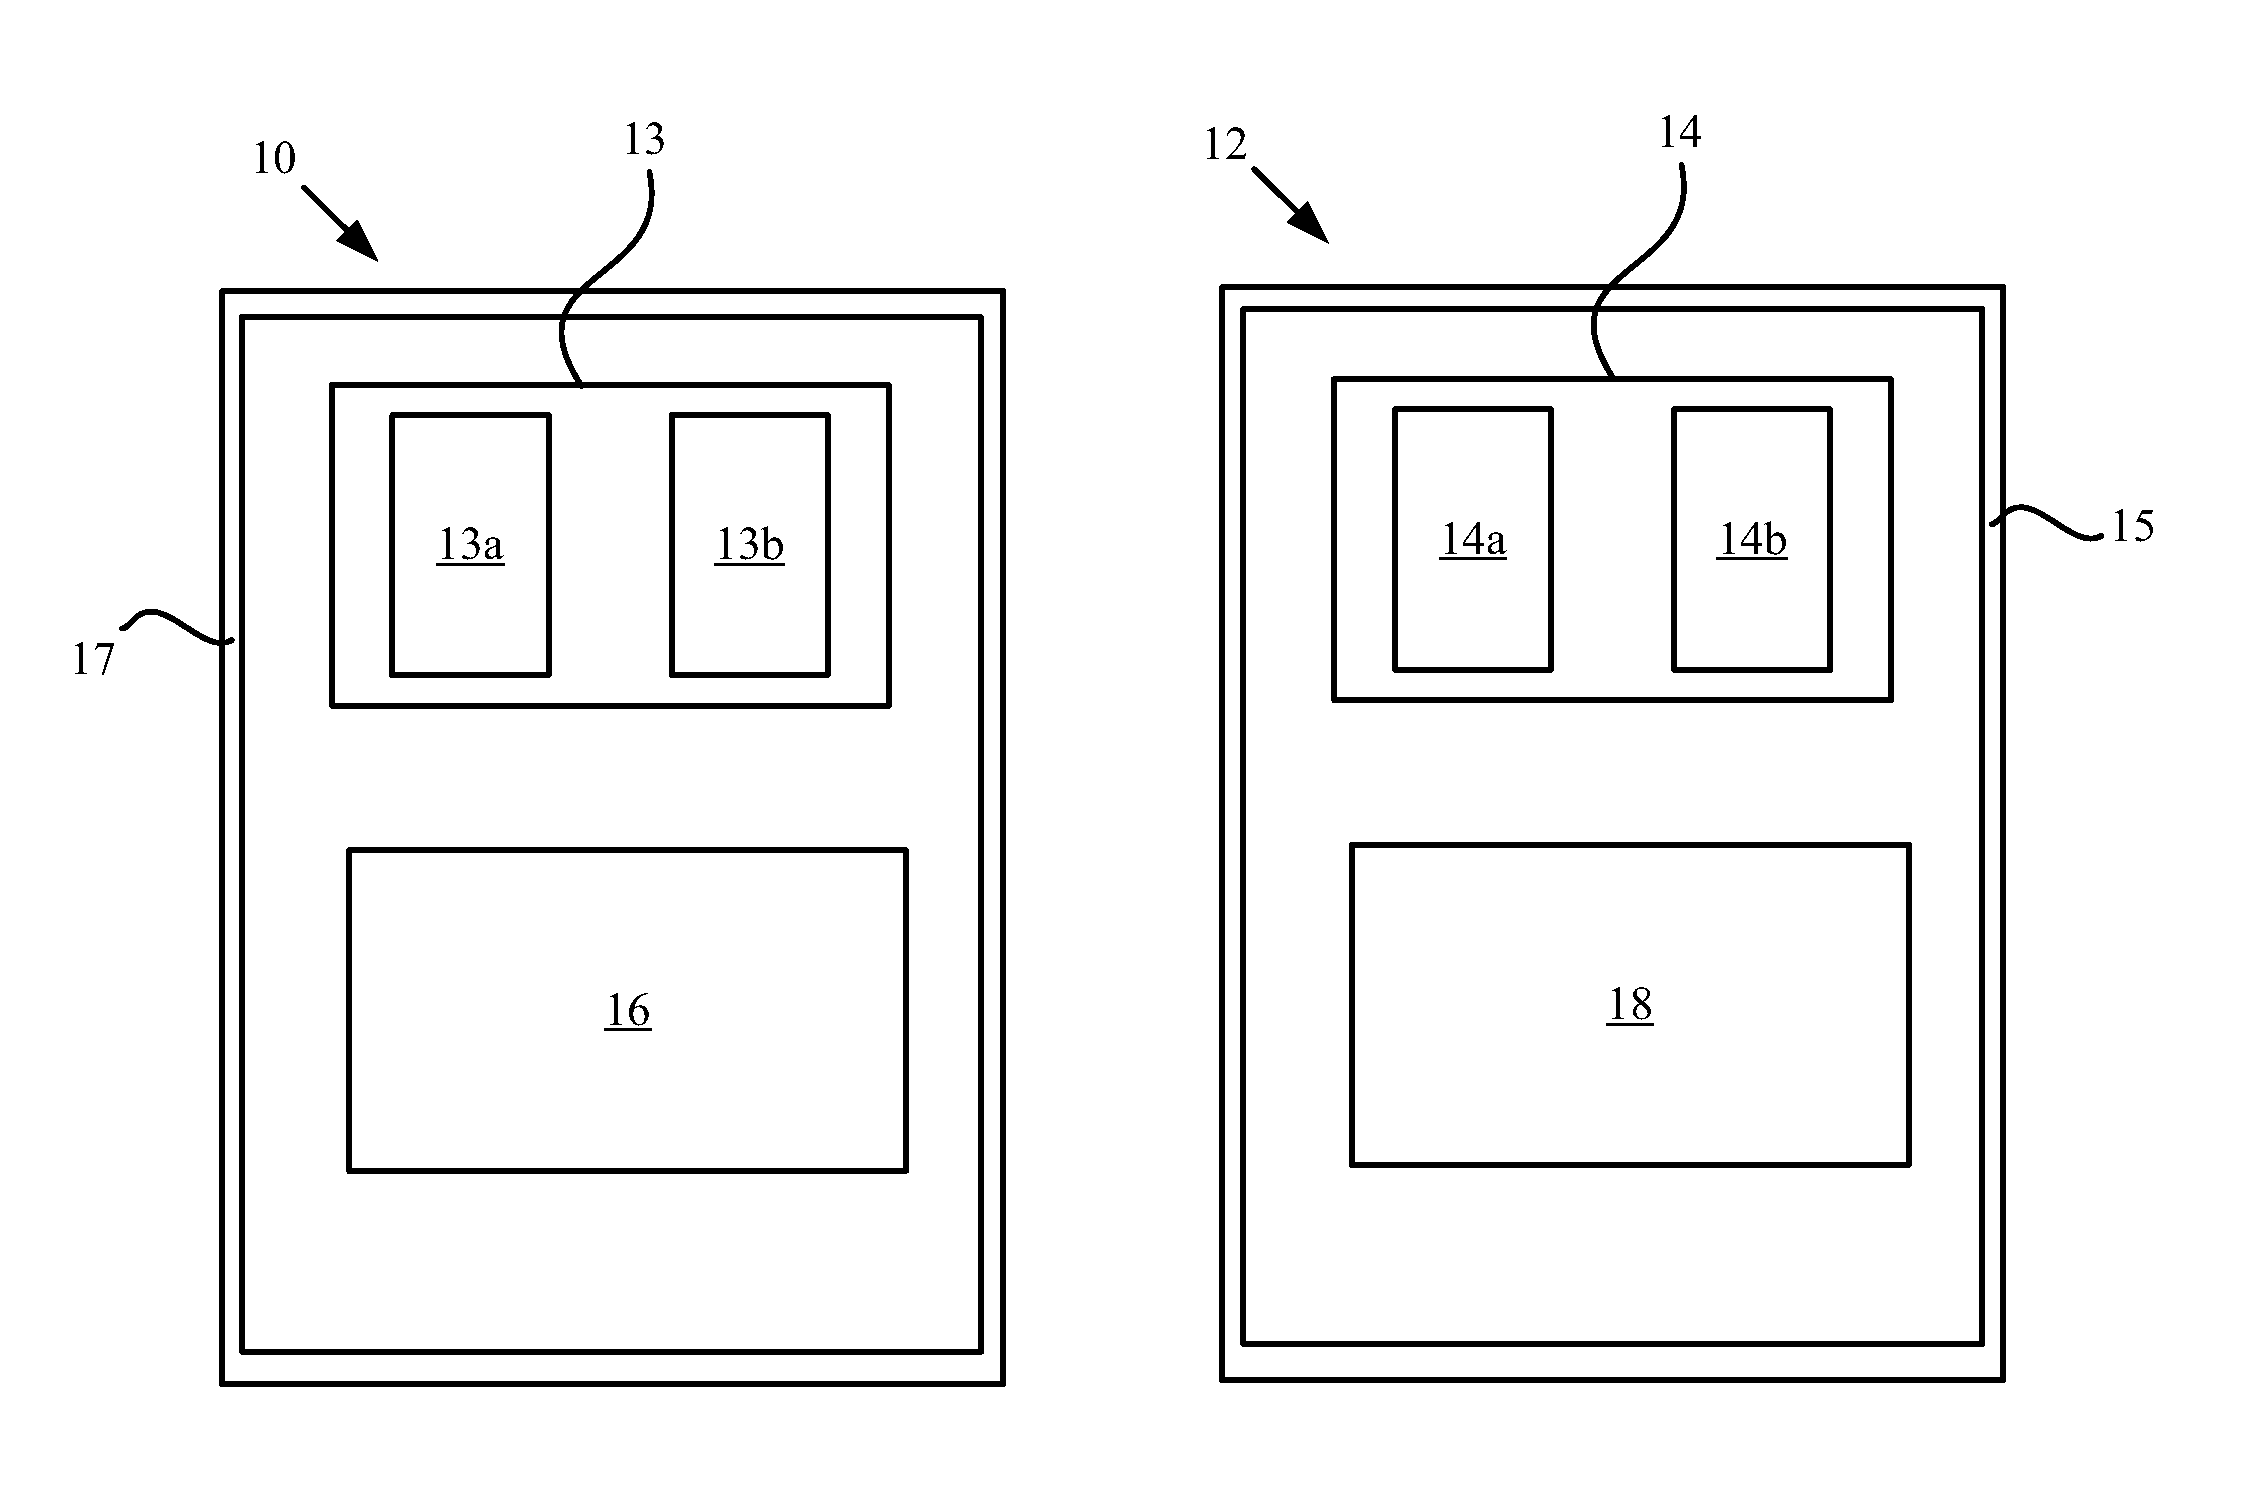 Foldable accessory device